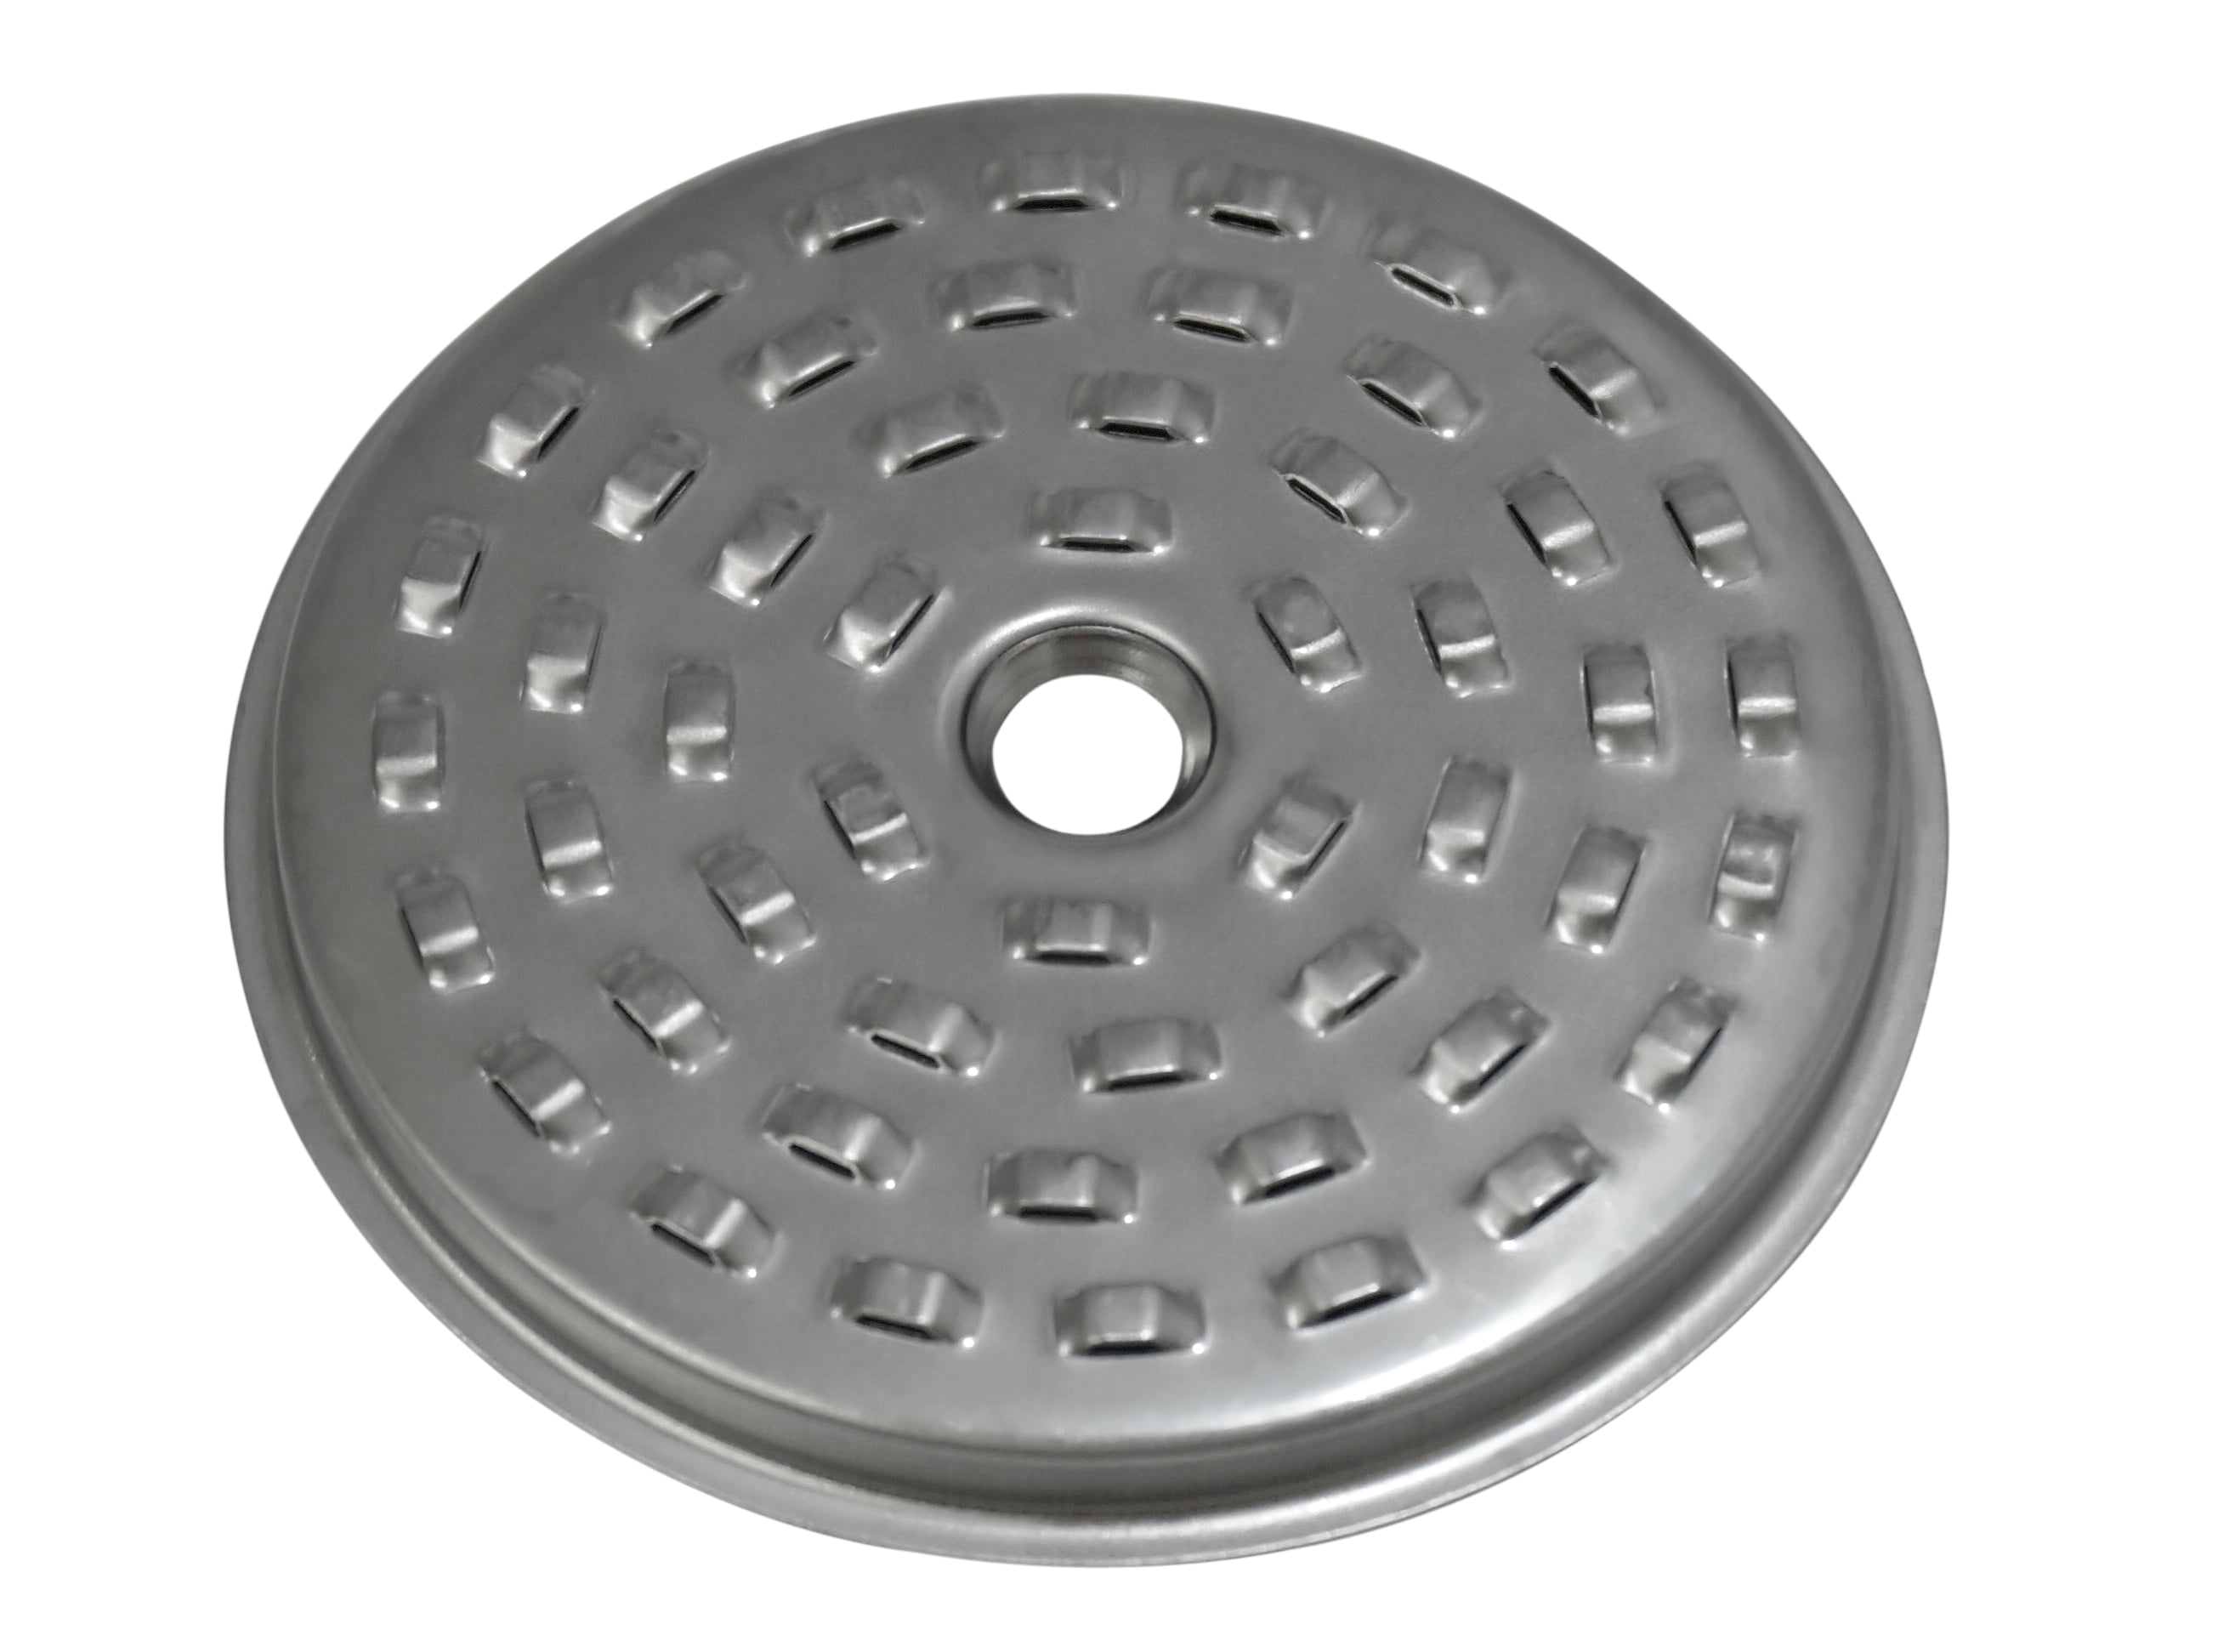 Presto 44239 Stainless Steel Basket Lid for 6-cup Percolator